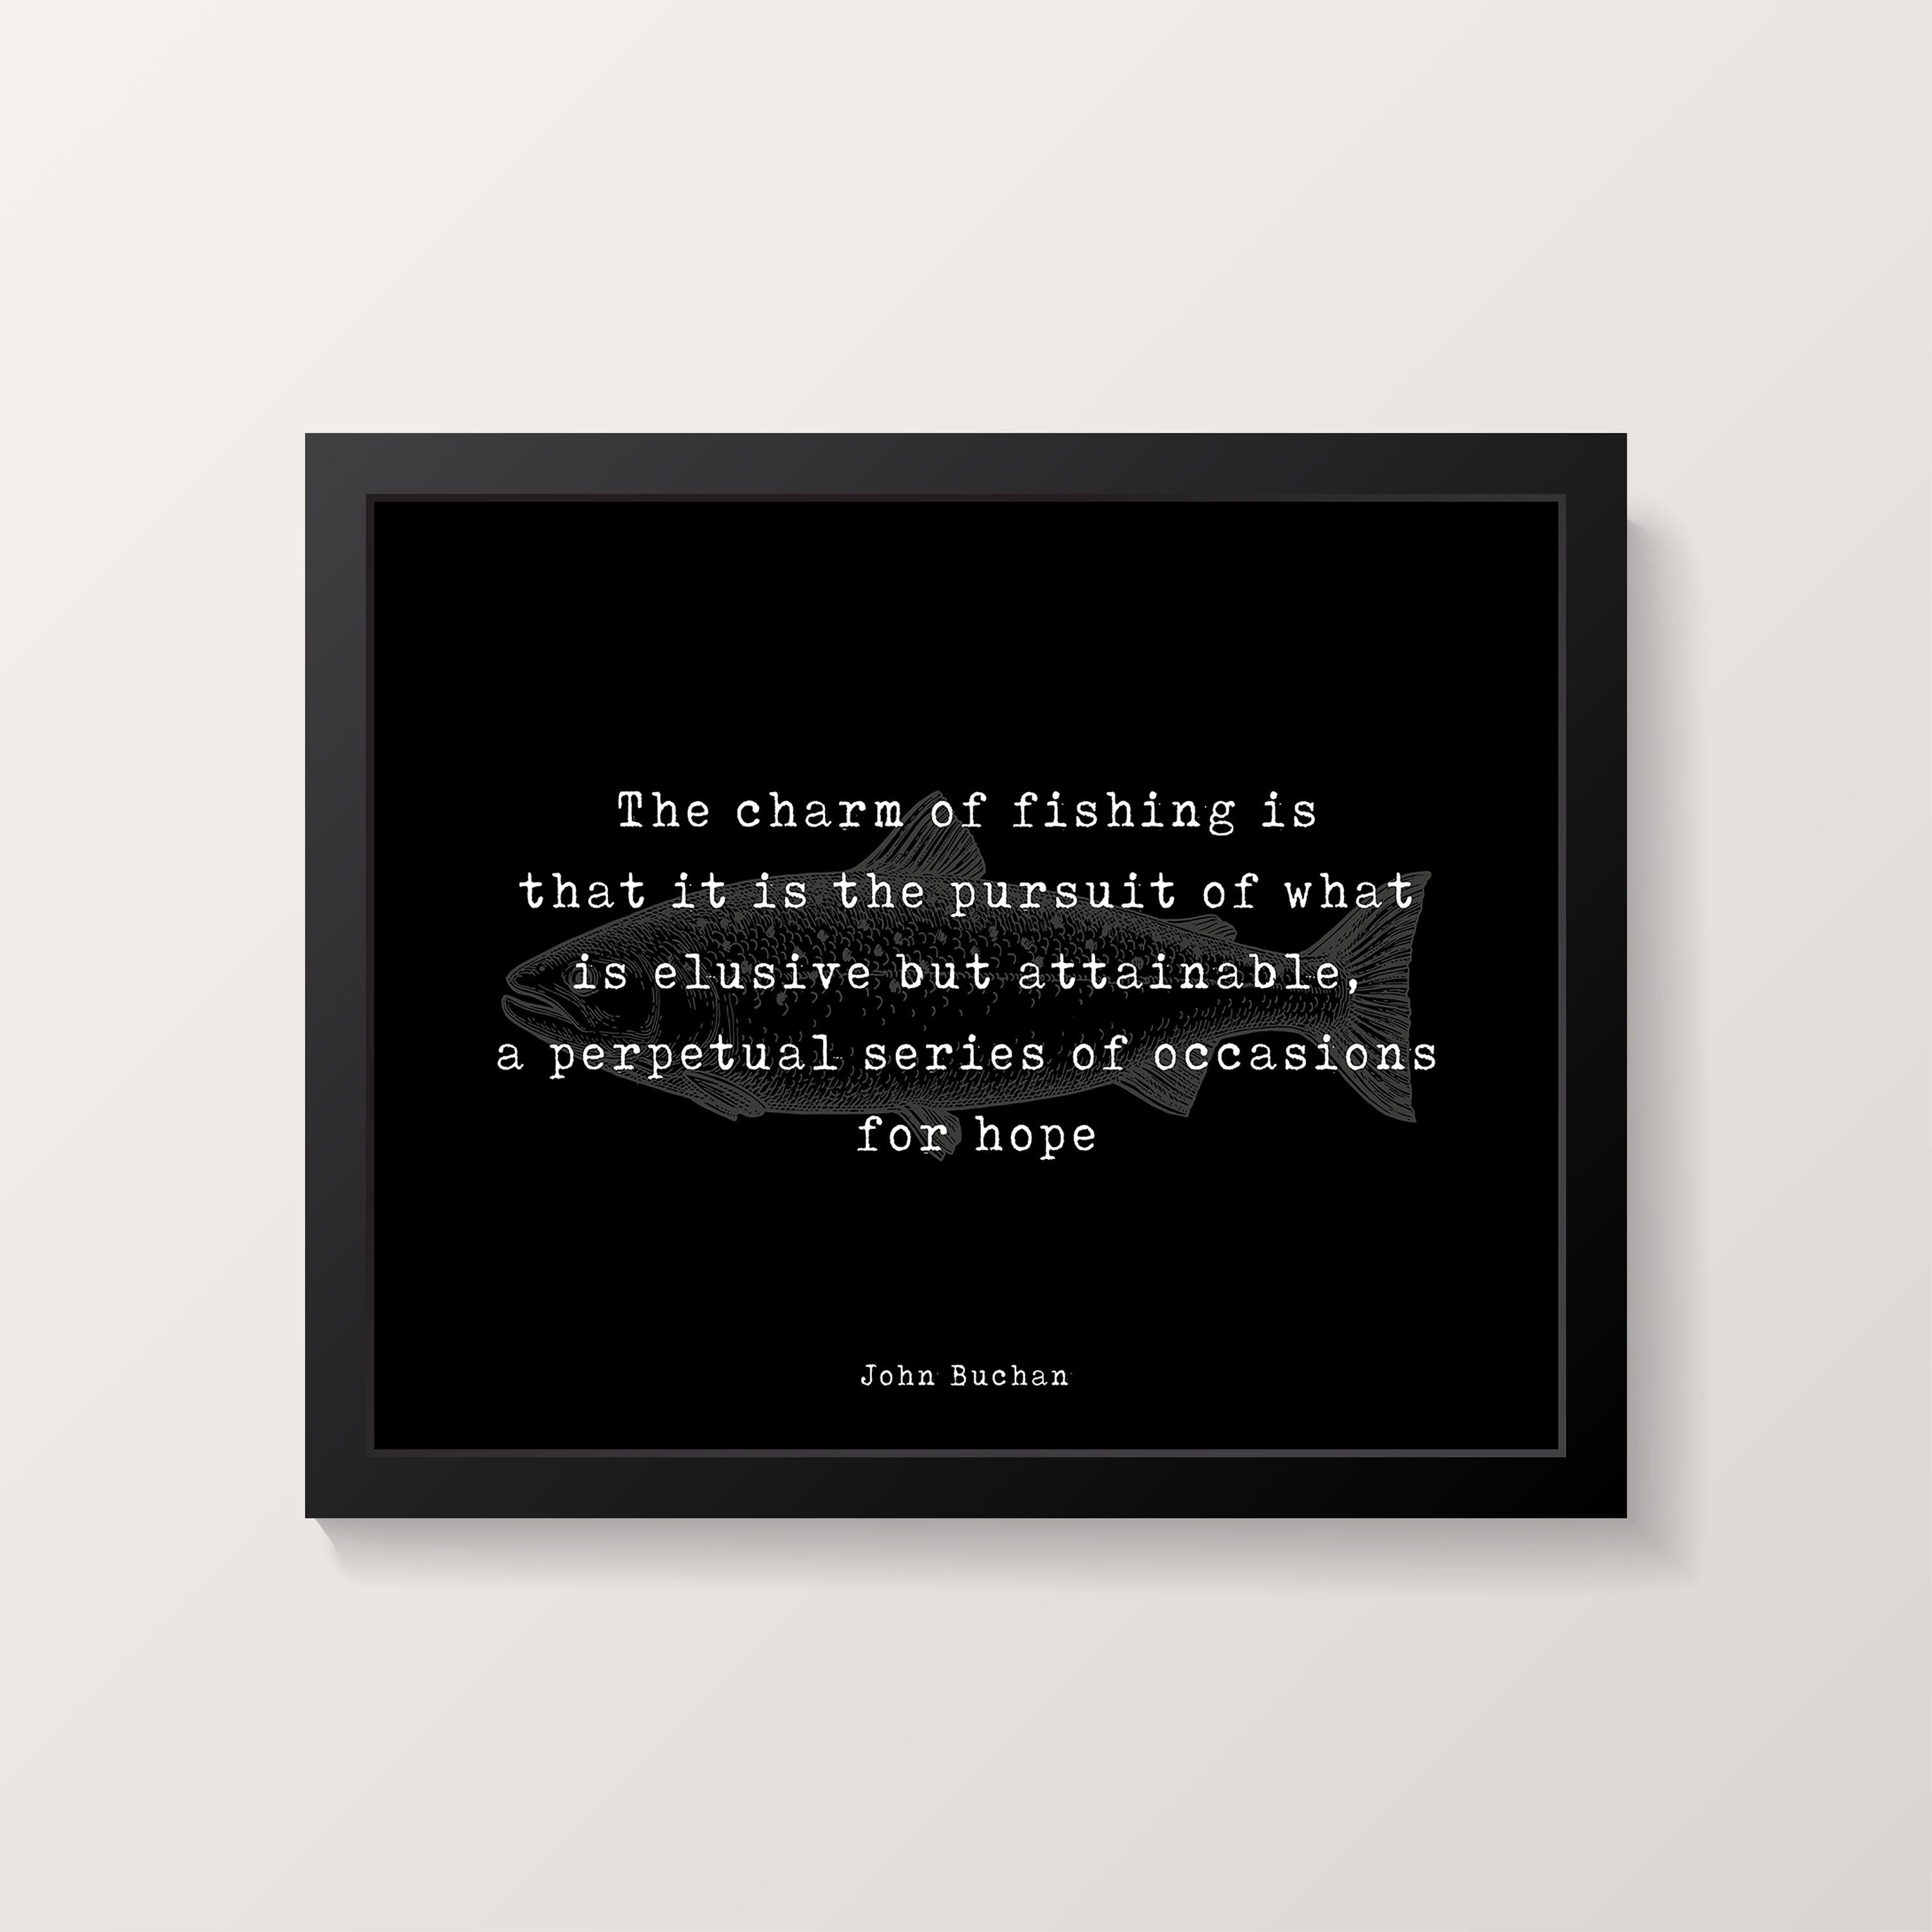 Framed Wall Art Fishing Quote Print by John Buchan, The Charm Of Fishing Wall Art Print for Living Room or Office Decor